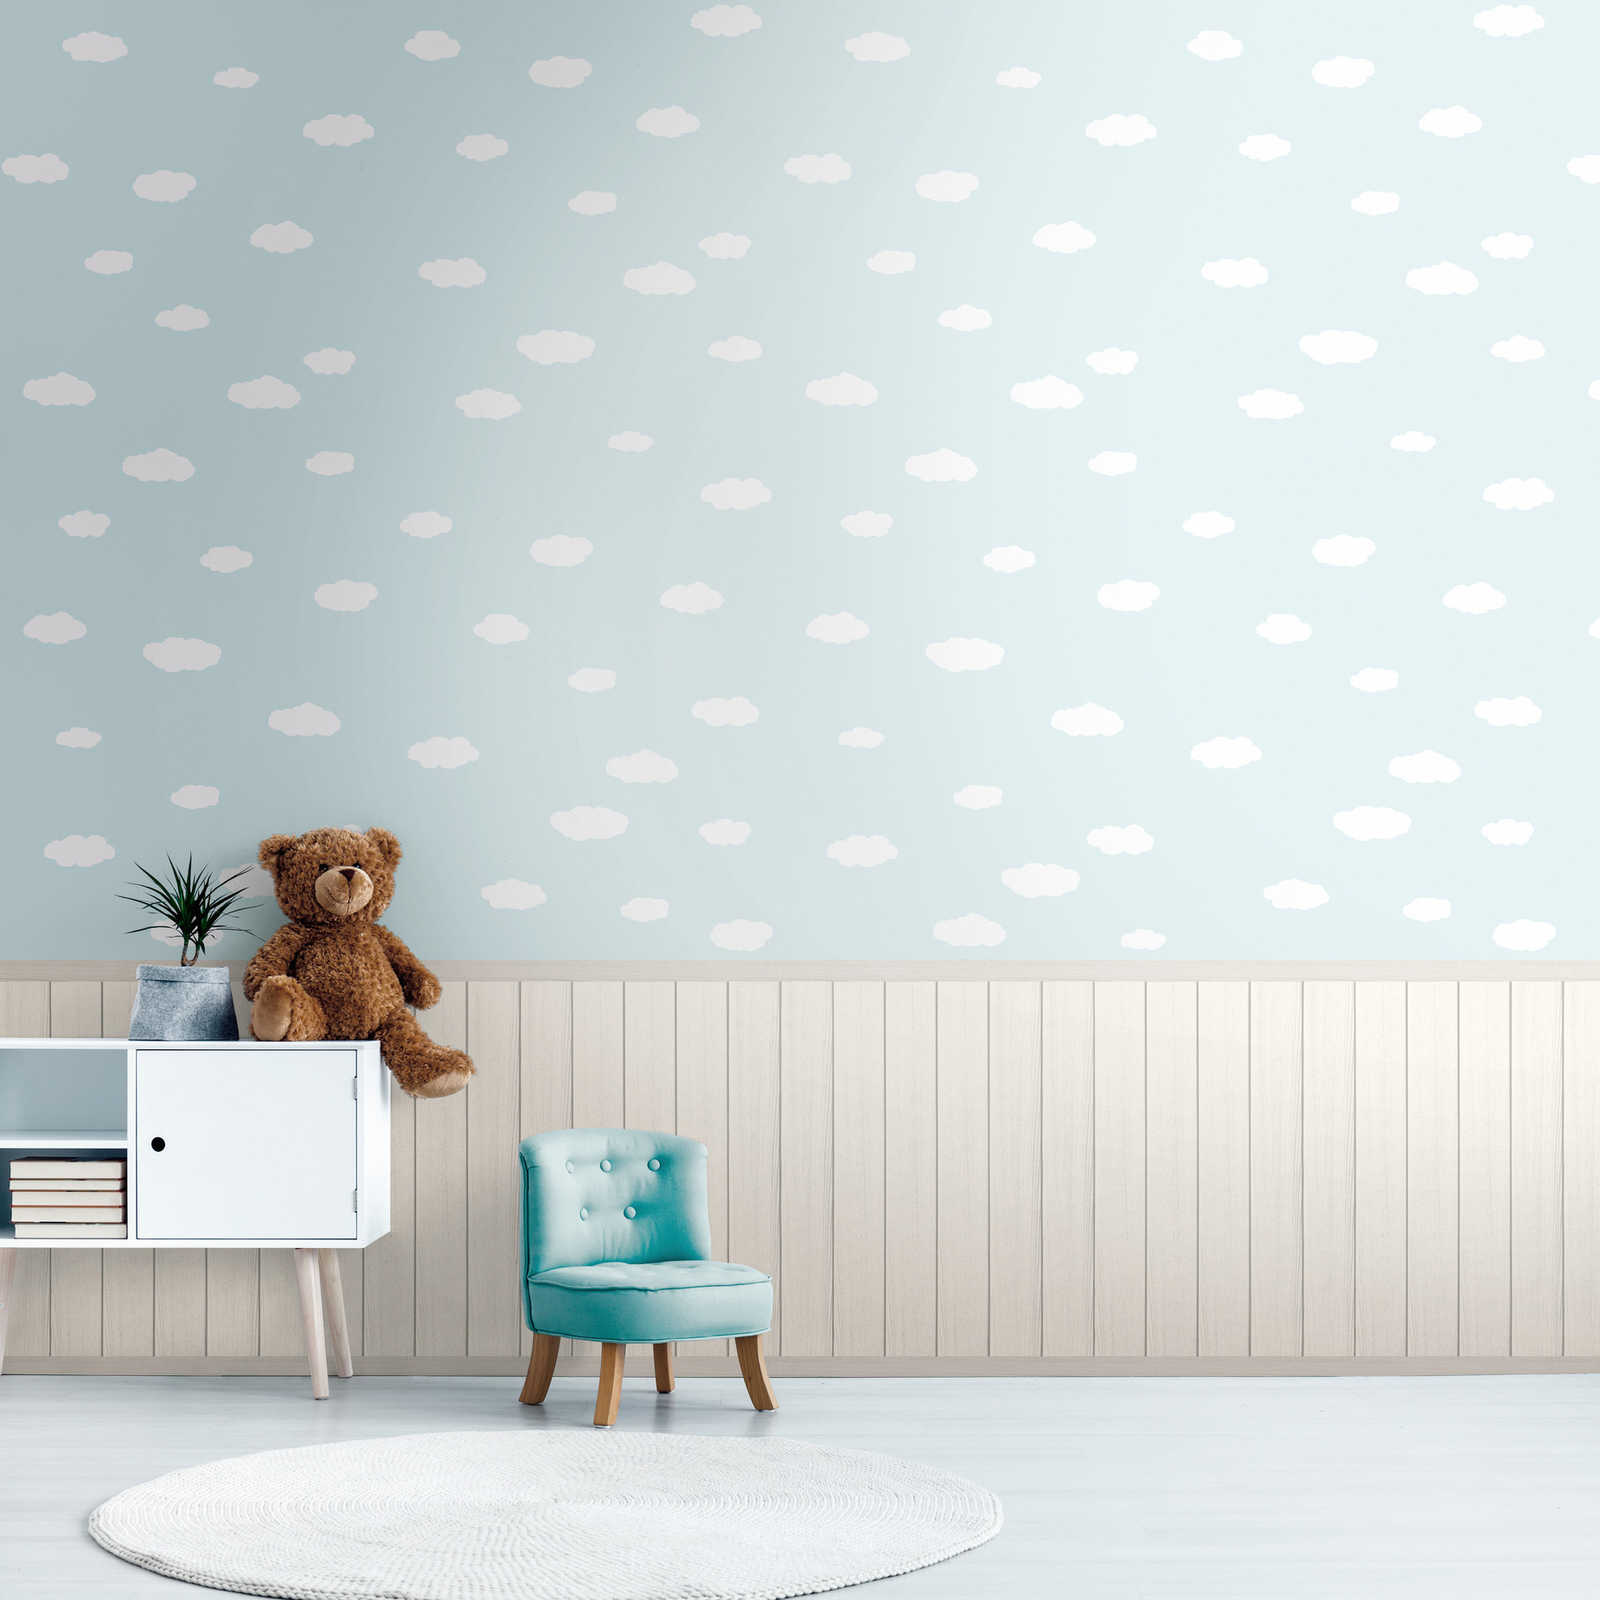 Non-woven motif wallpaper with wood-effect plinth border and cloud pattern - blue, white, grey
